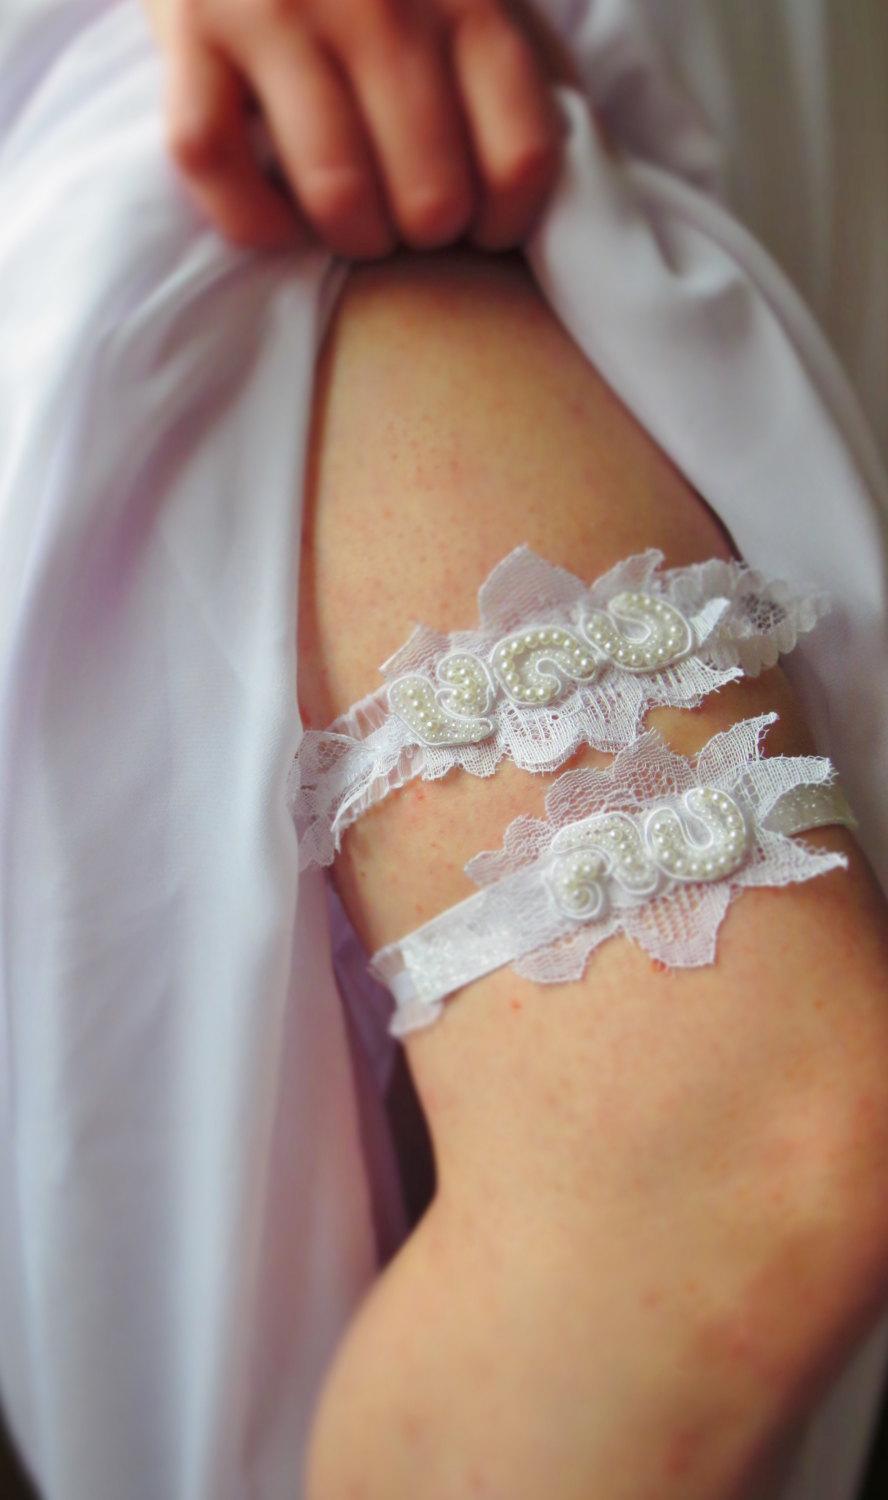 Свадьба - Simple White Pearl, Lace and Ruffle Wedding Garter set- Keepsake and Toss away White ruffle garters w/ floral lace applique and pearl accent